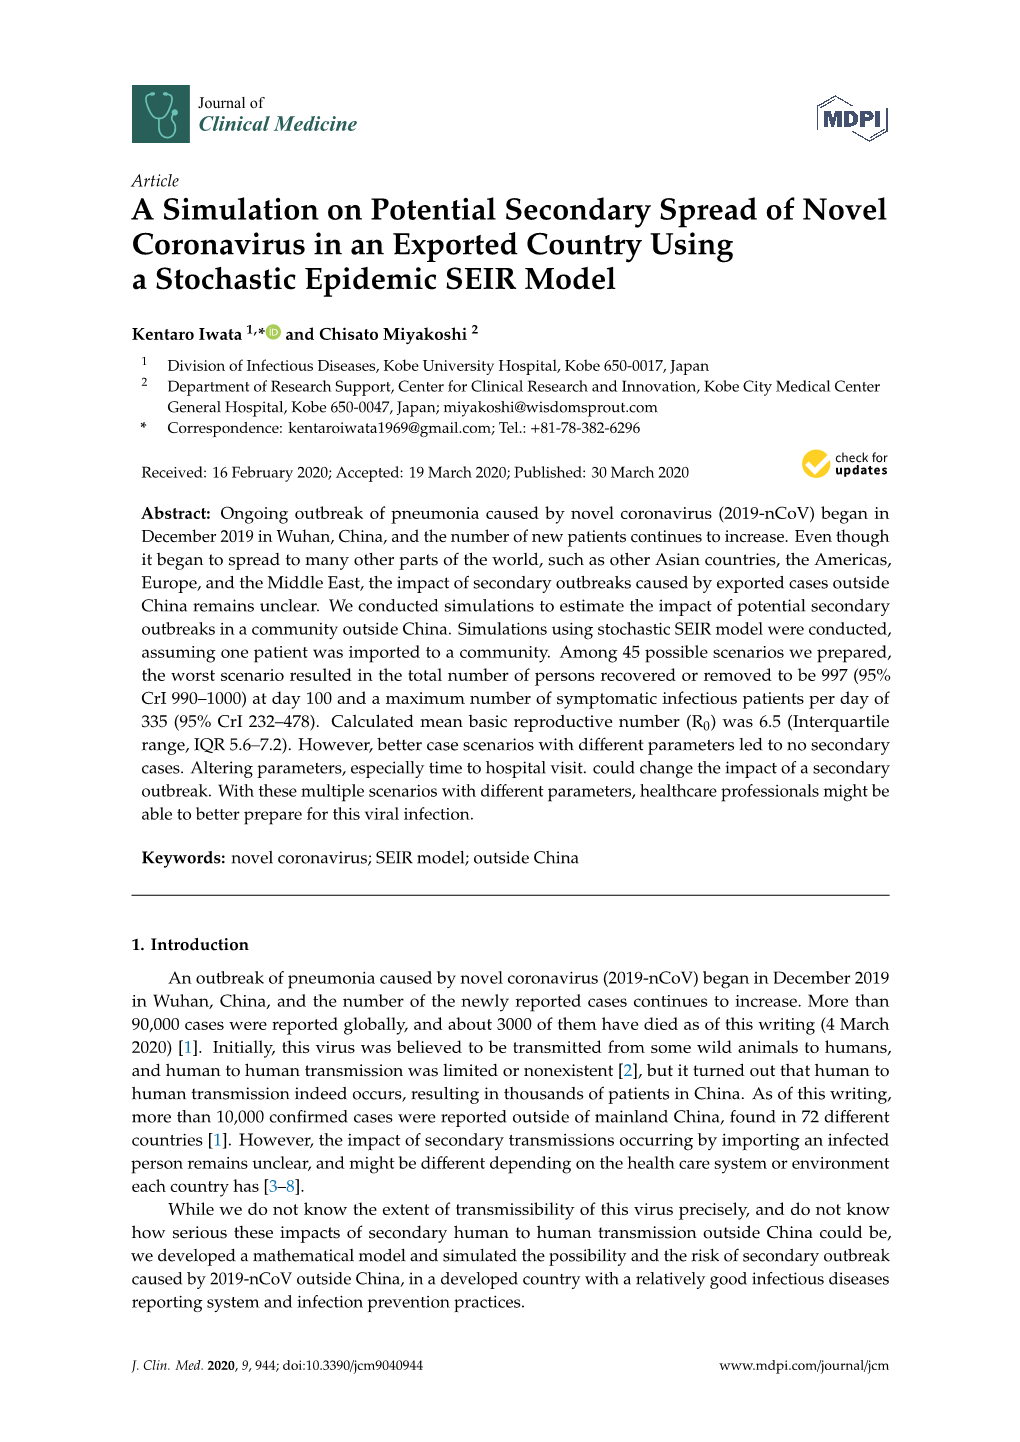 A Simulation on Potential Secondary Spread of Novel Coronavirus in an Exported Country Using a Stochastic Epidemic SEIR Model